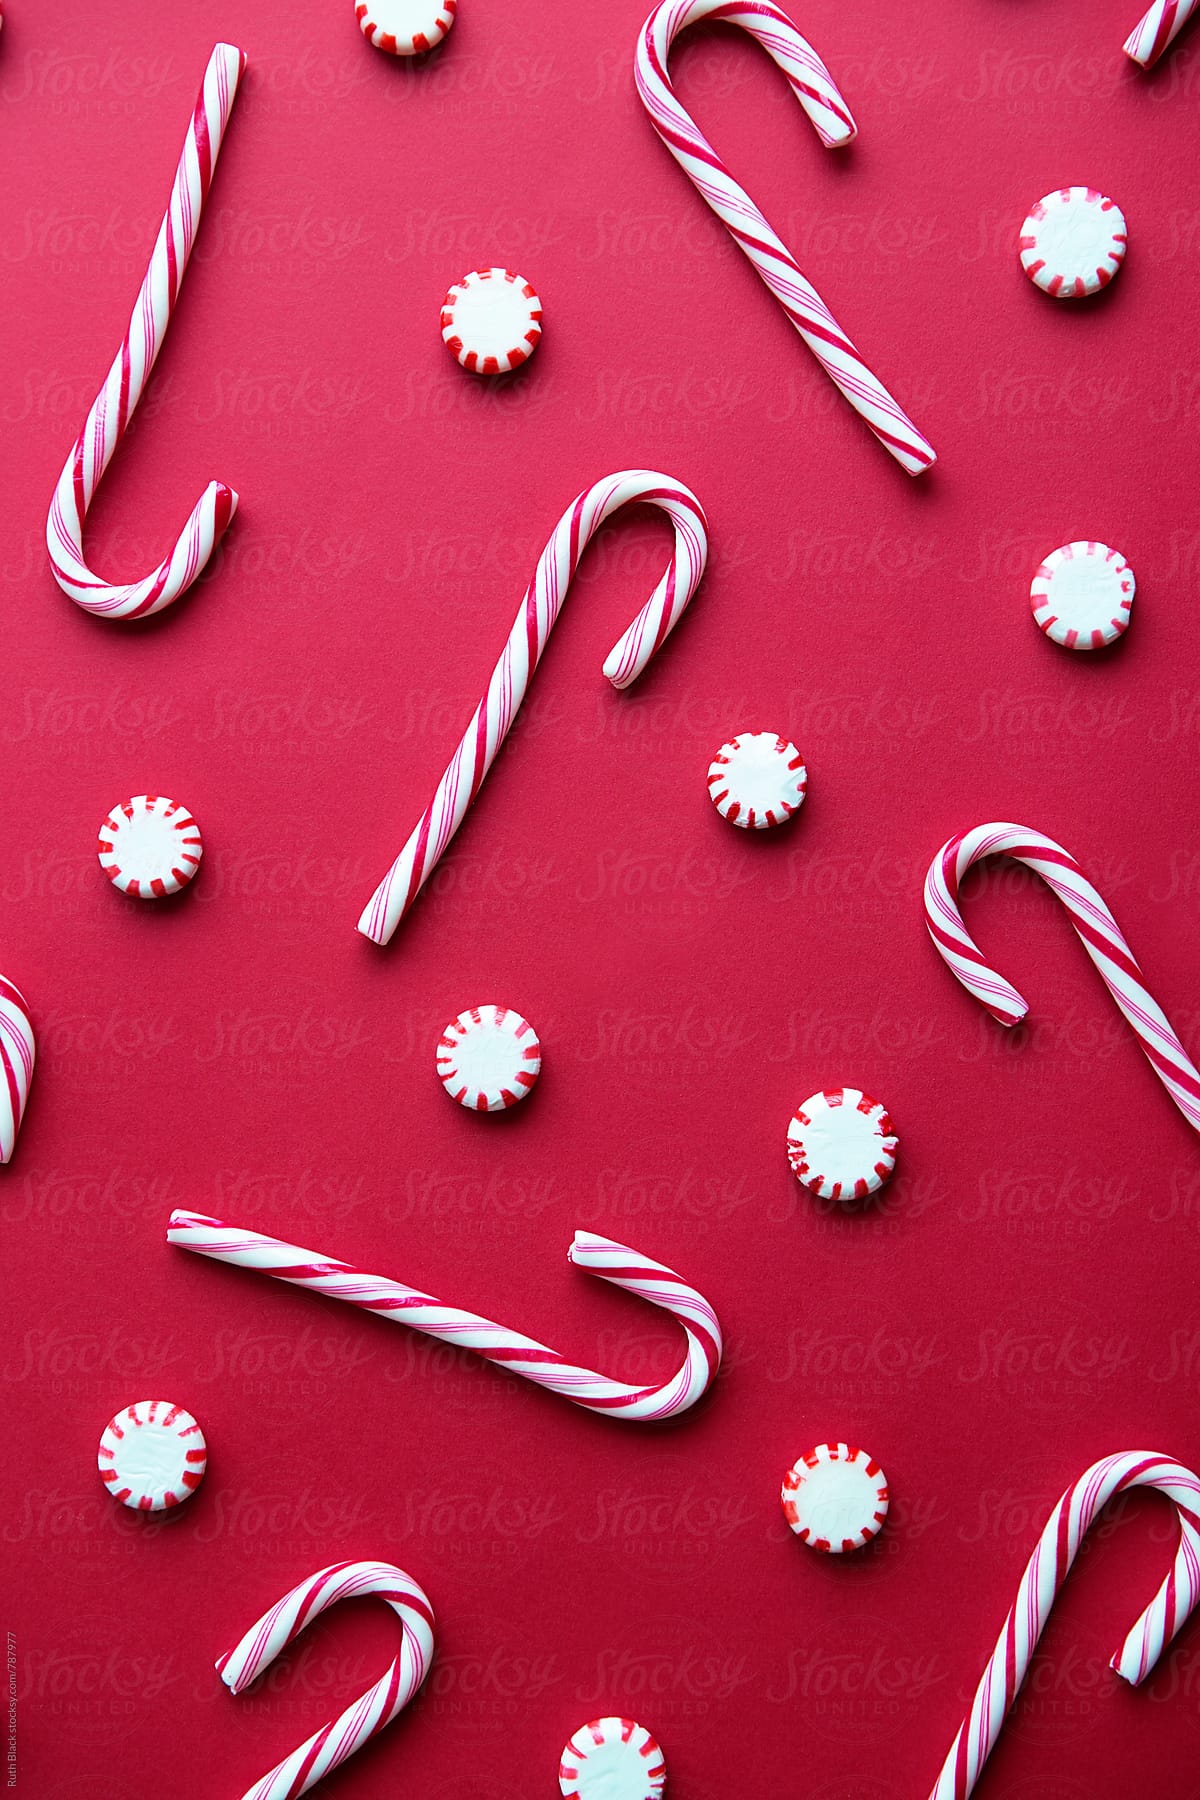 Red and white candy canes and peppermint candies on a red background - Candy cane